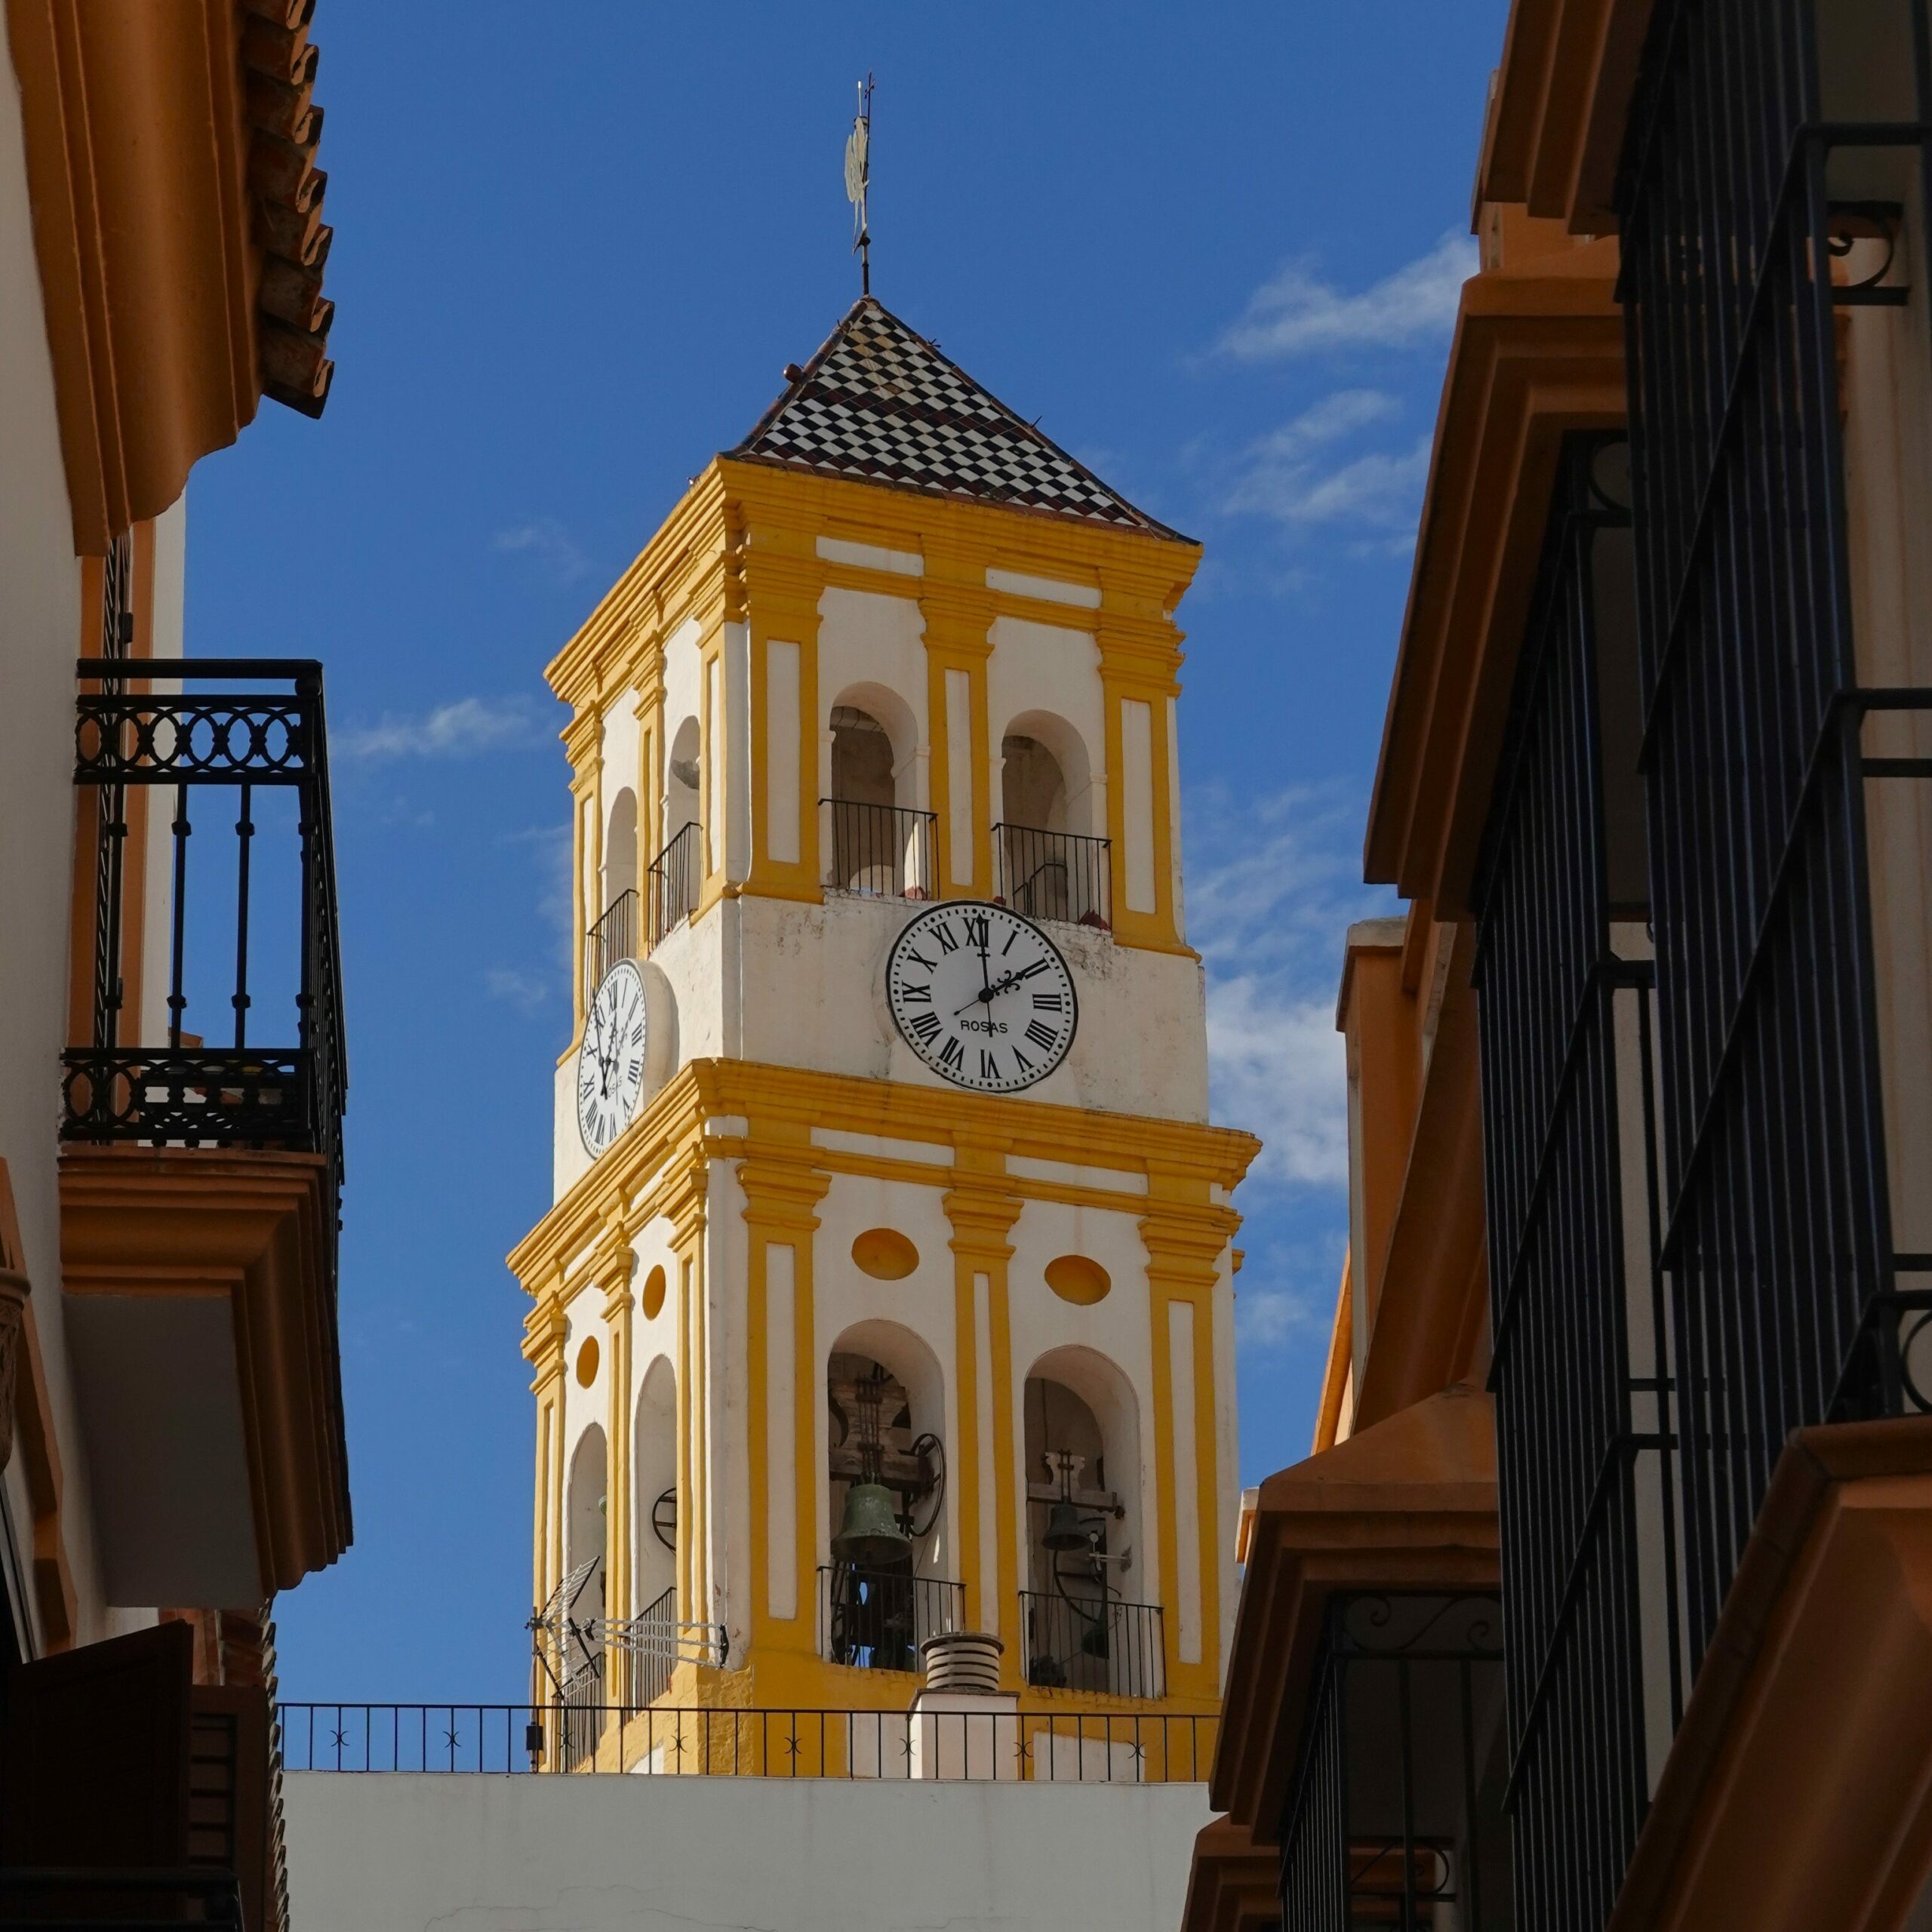 The churchtower in the historical Old Town of Marbella, Spain